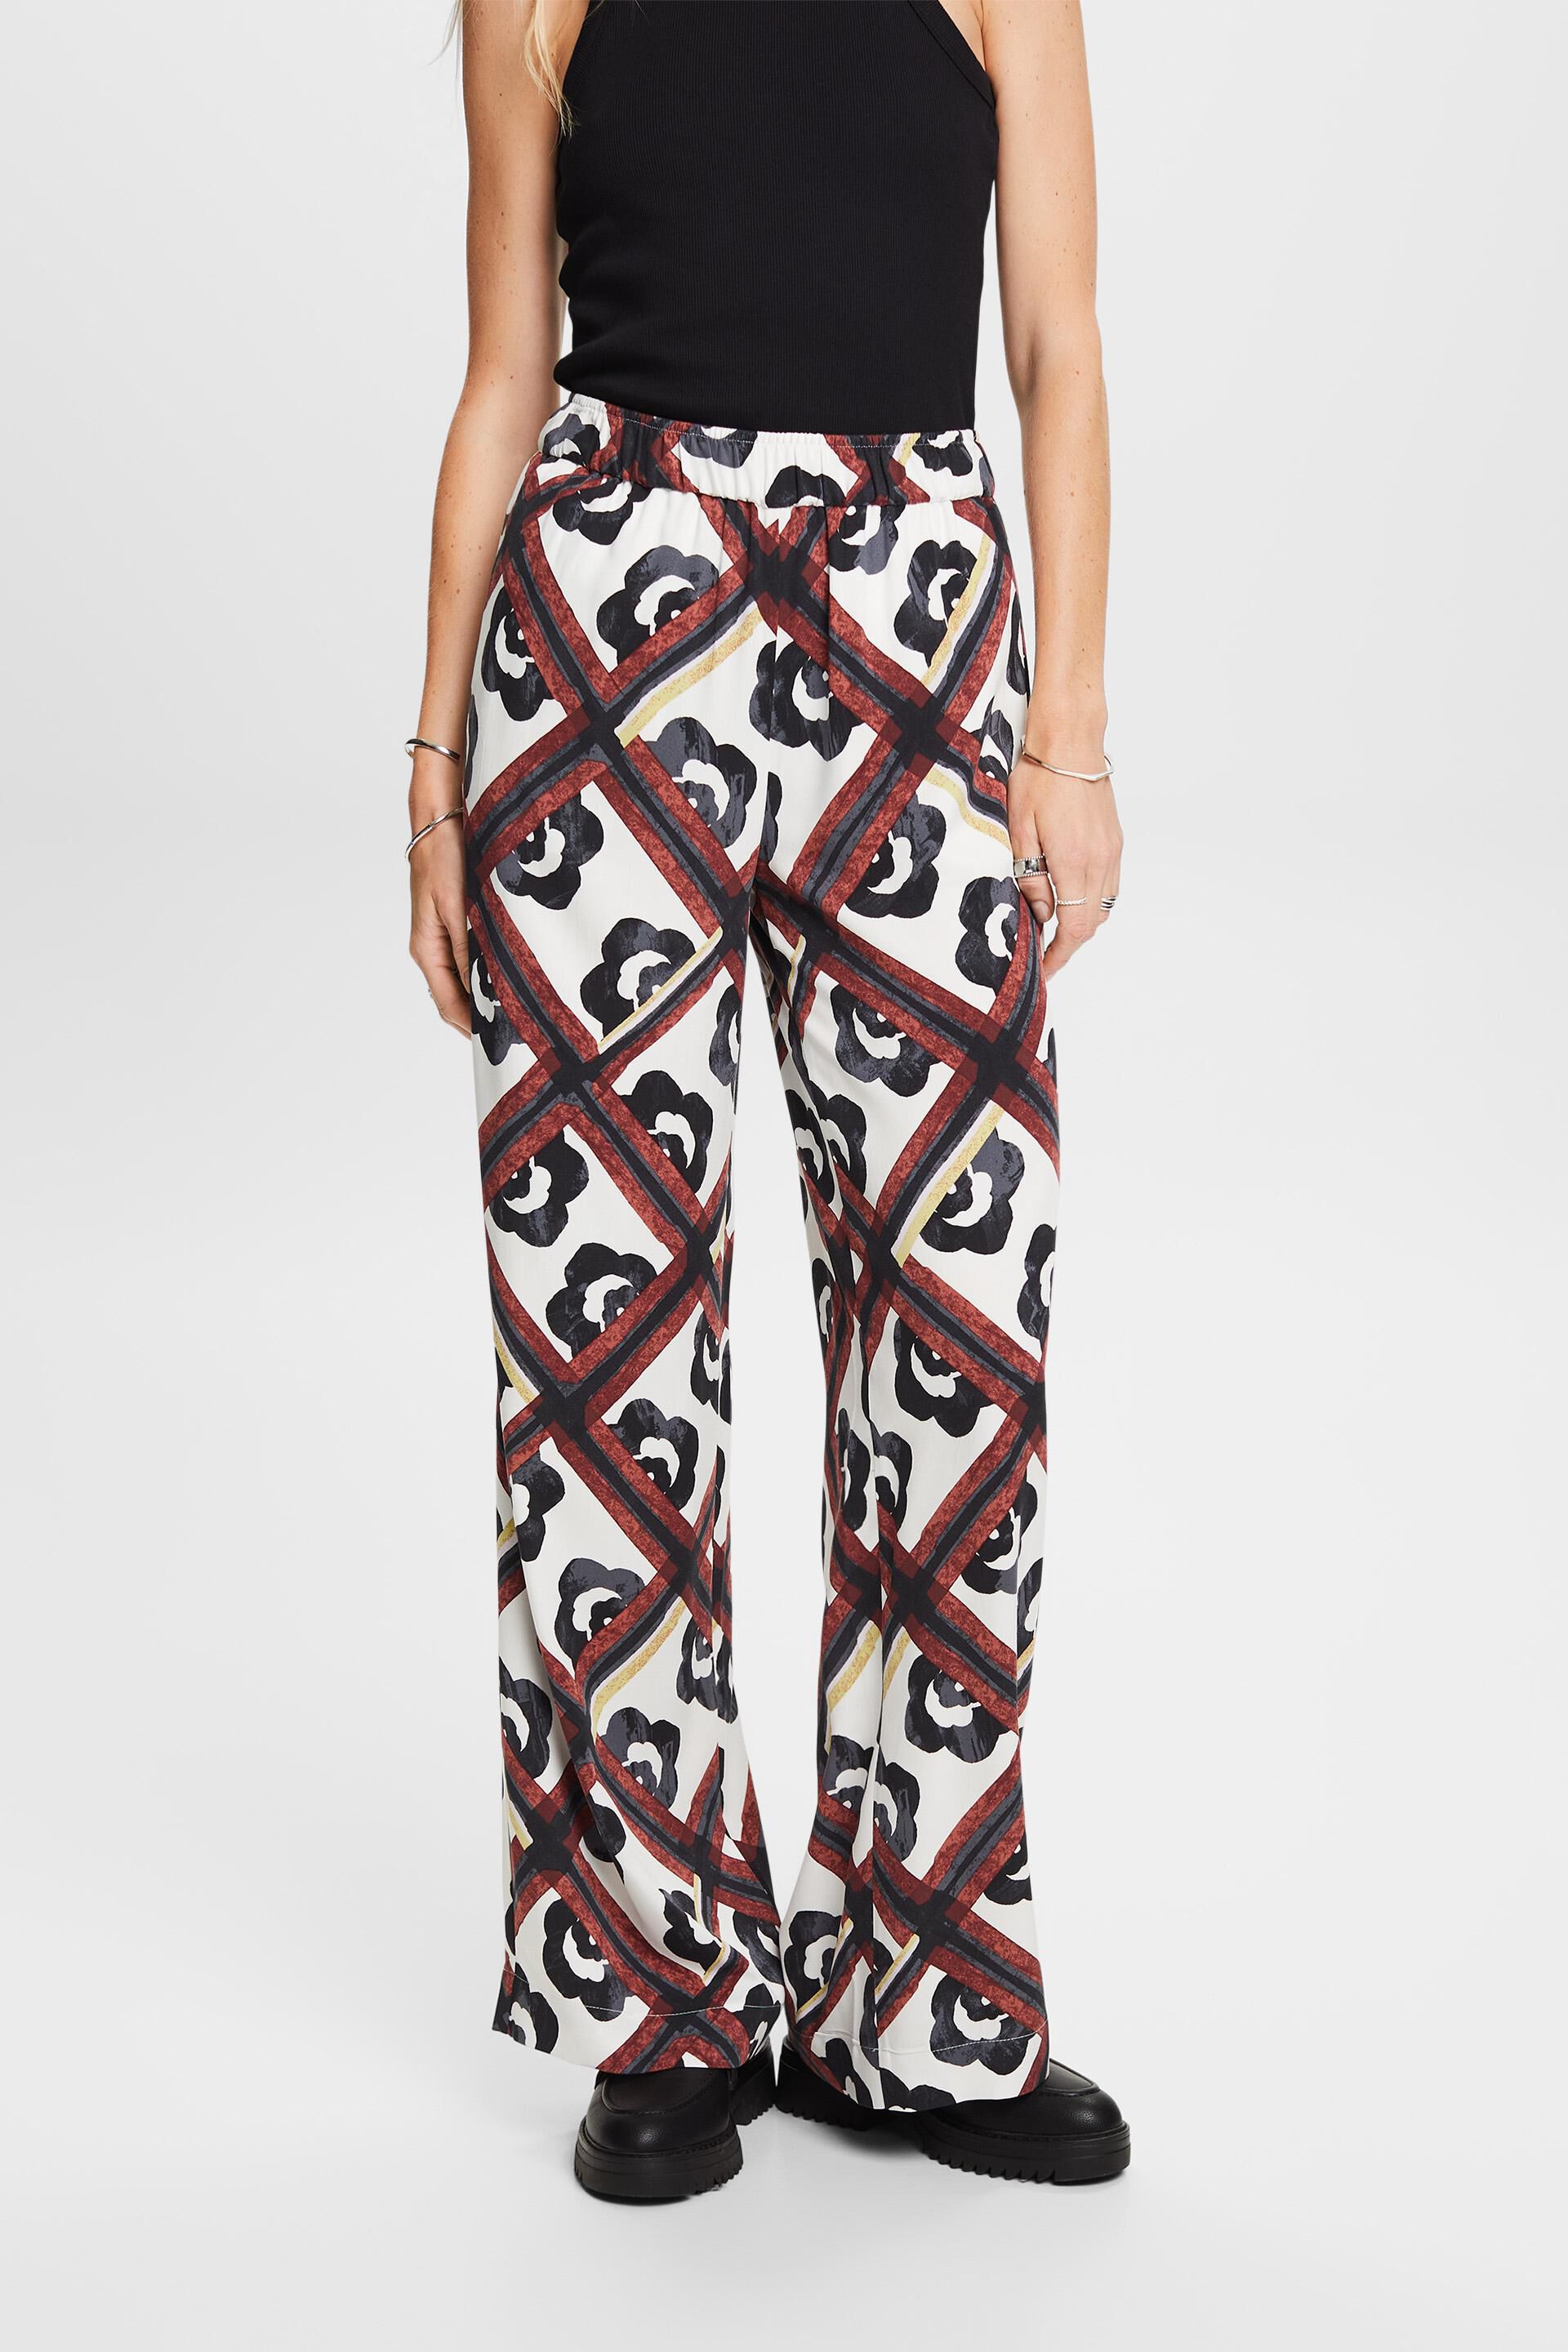 Esprit pull-on LENZING™ Patterned ECOVERO™ trousers,